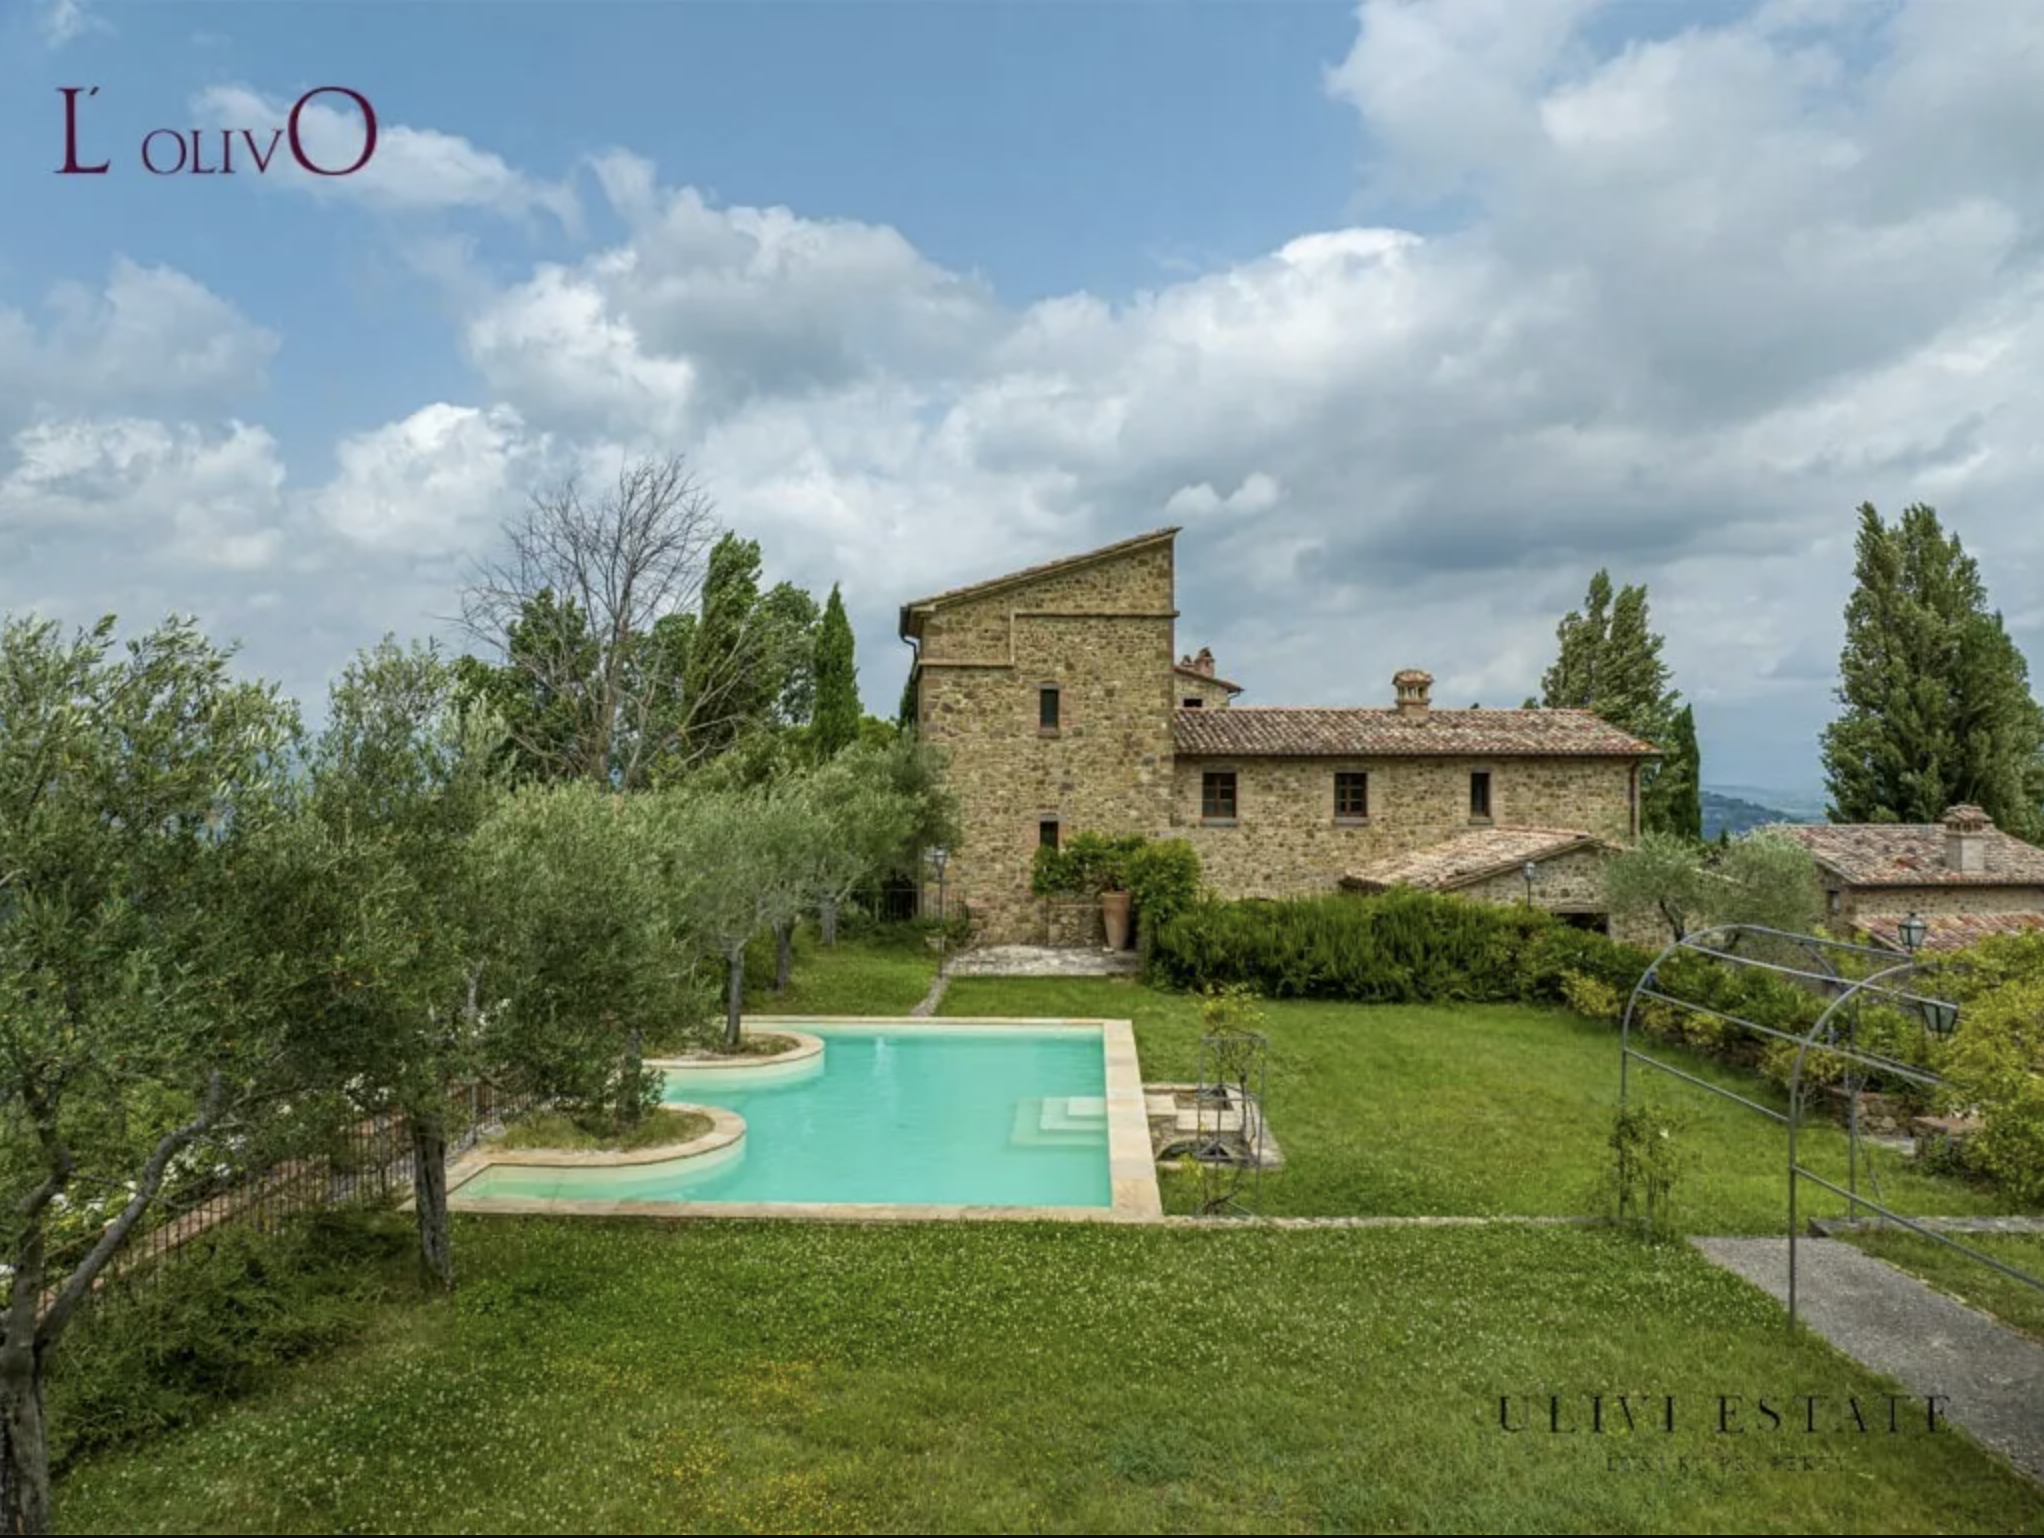 Francis York Borgo Pieve di Comunaglia in Umbria, Italy With 17 Country Houses, 1000-Year-Old Church, Vineyards 00035.png